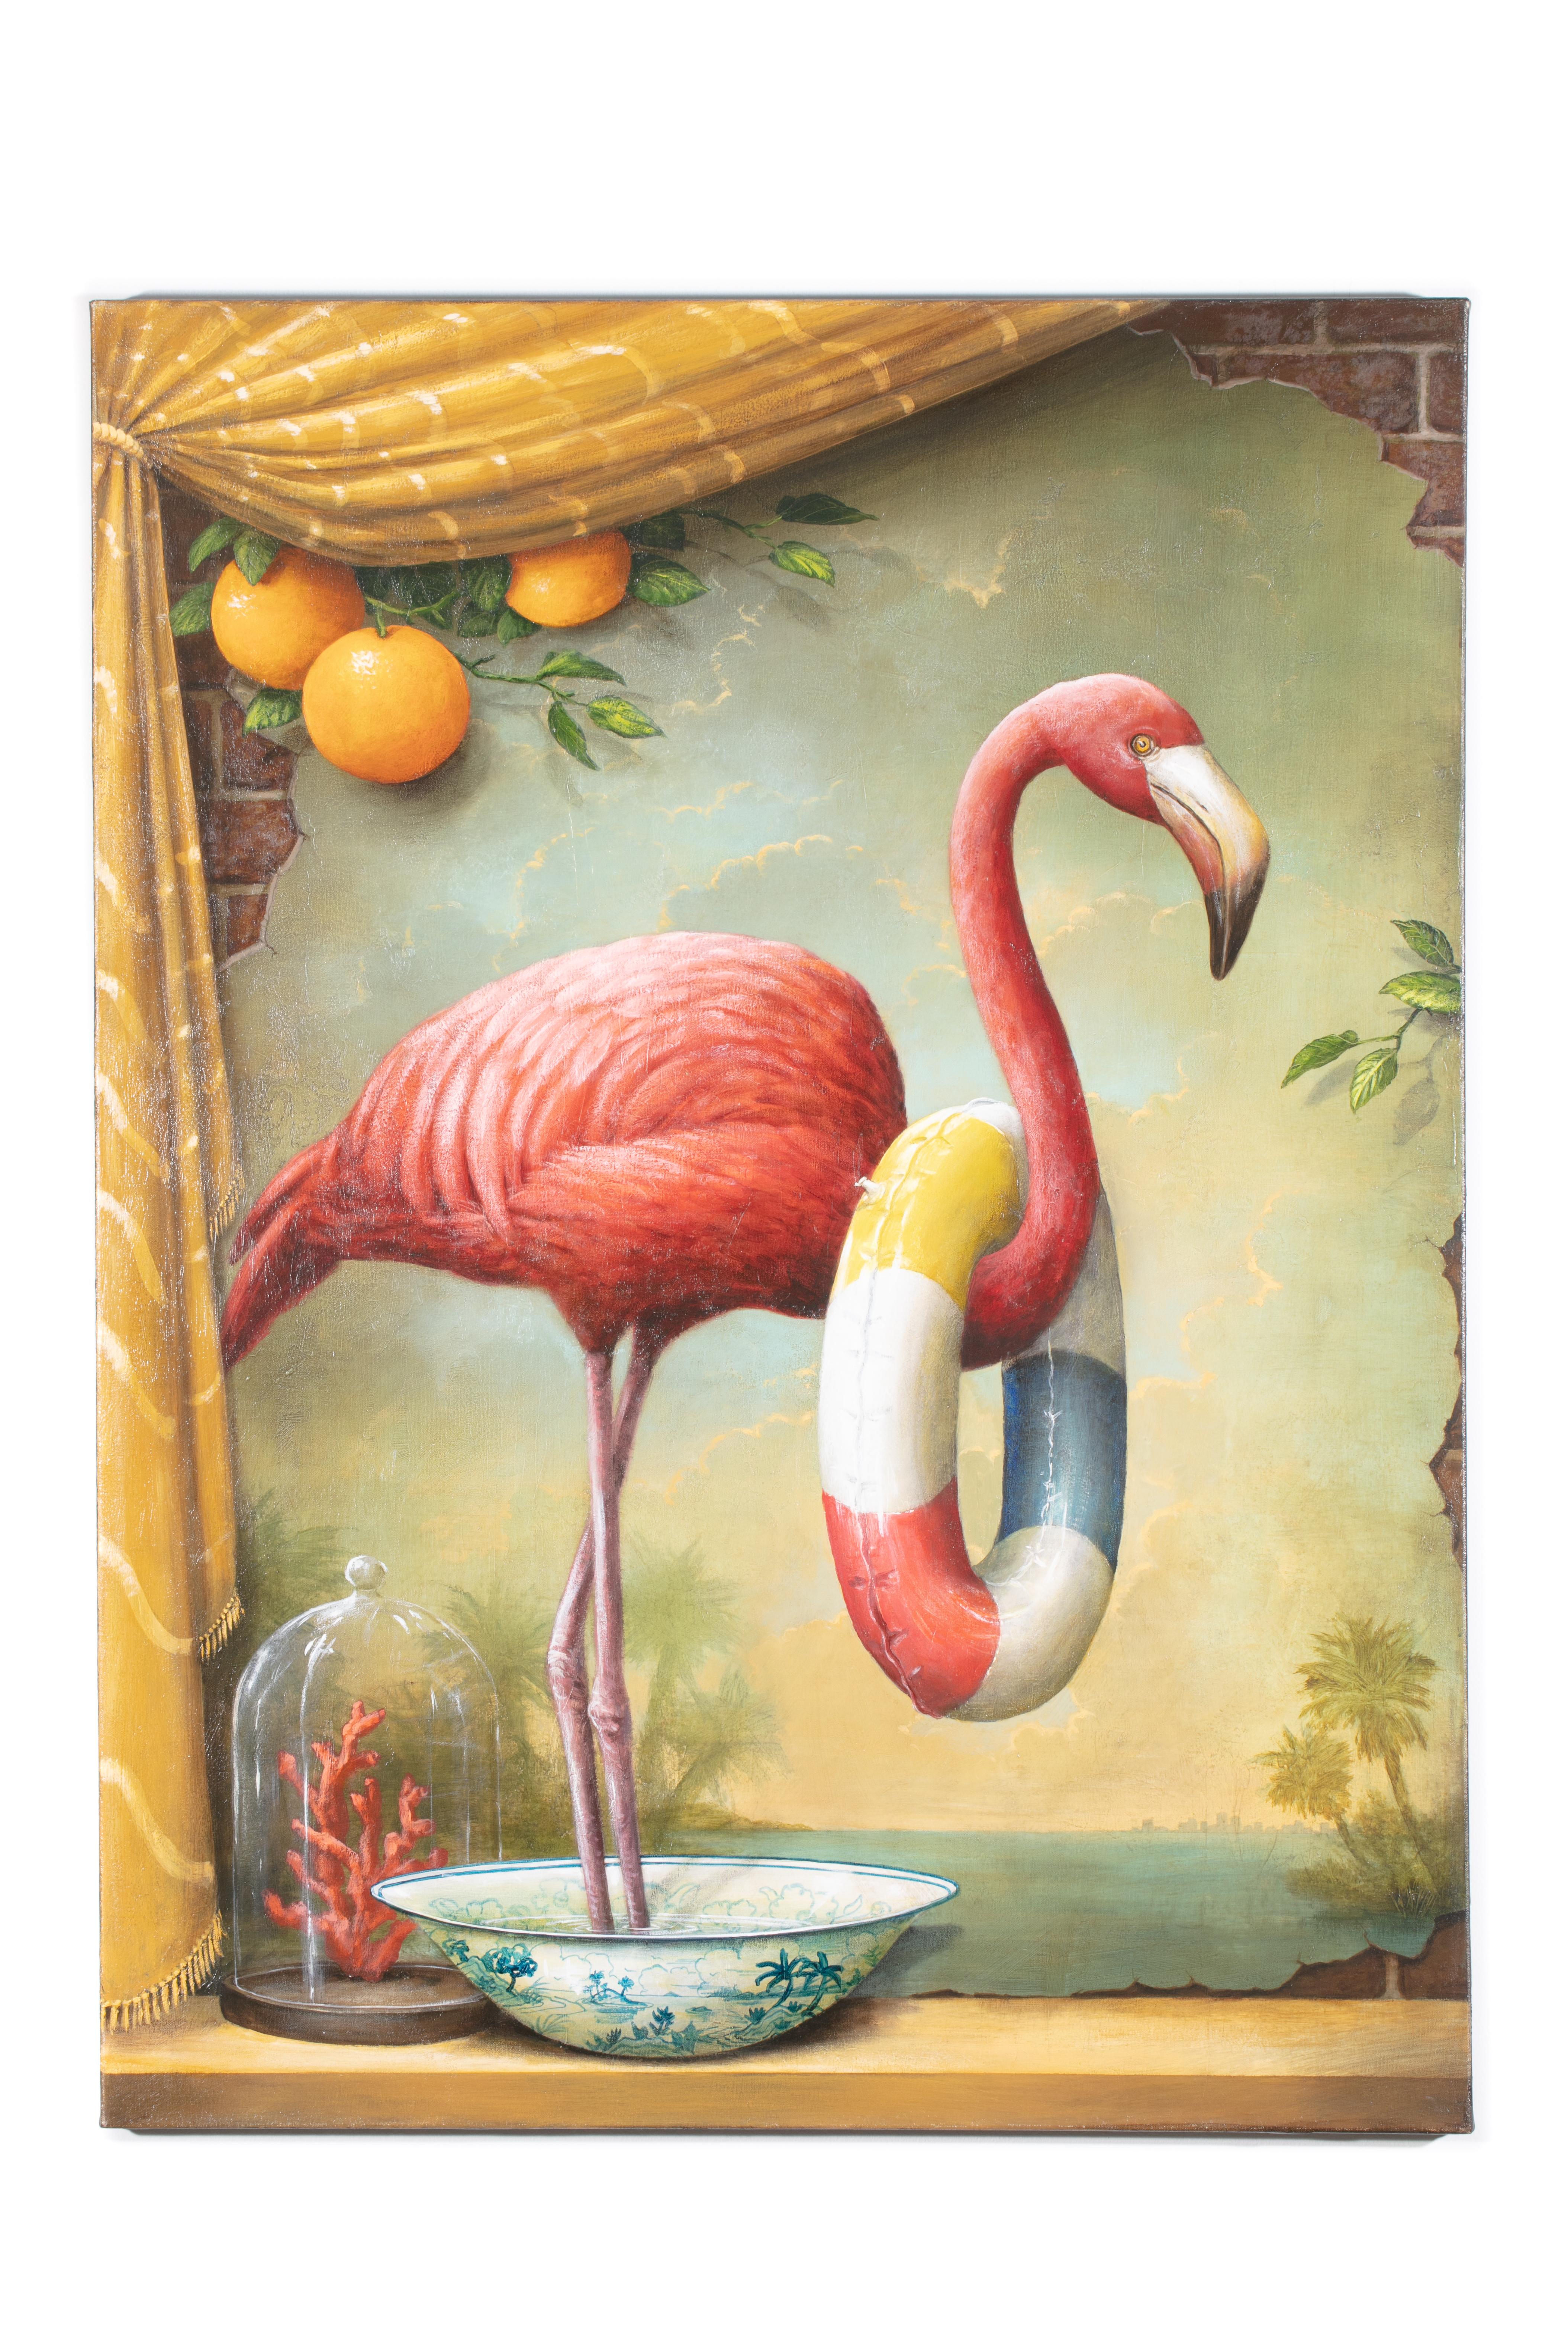 Modern Wilderness - Painting by Kevin Sloan